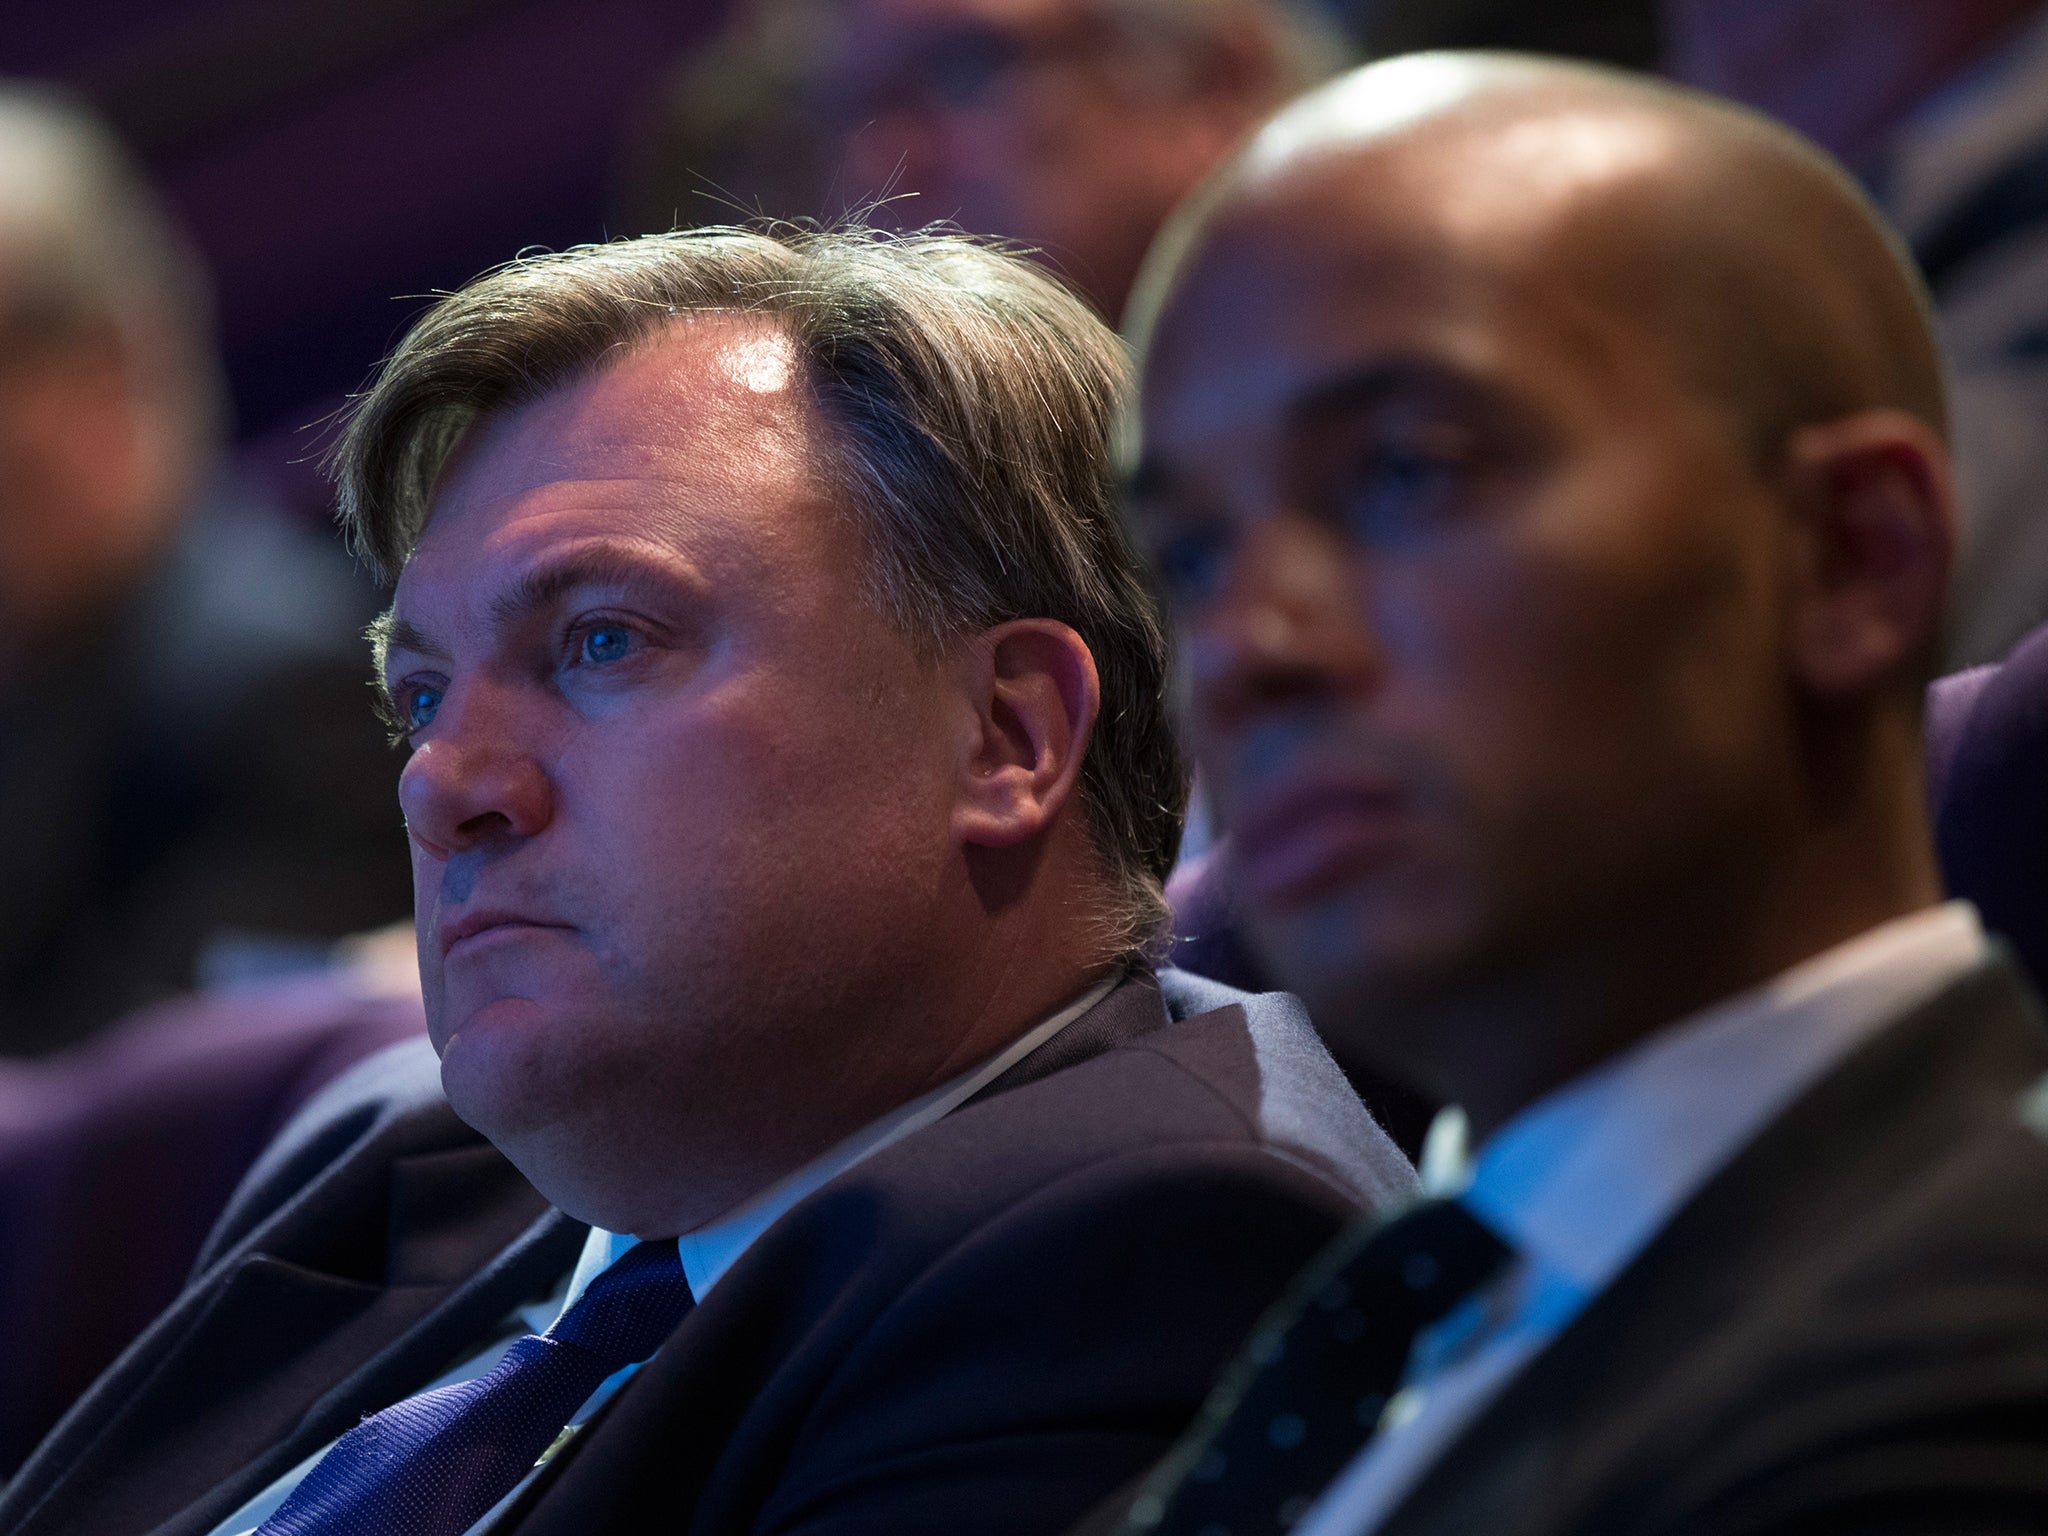 Ed Balls, left, and Chuka Umunna appeared to have conflicting views on keeping receipts for small maintenance jobs